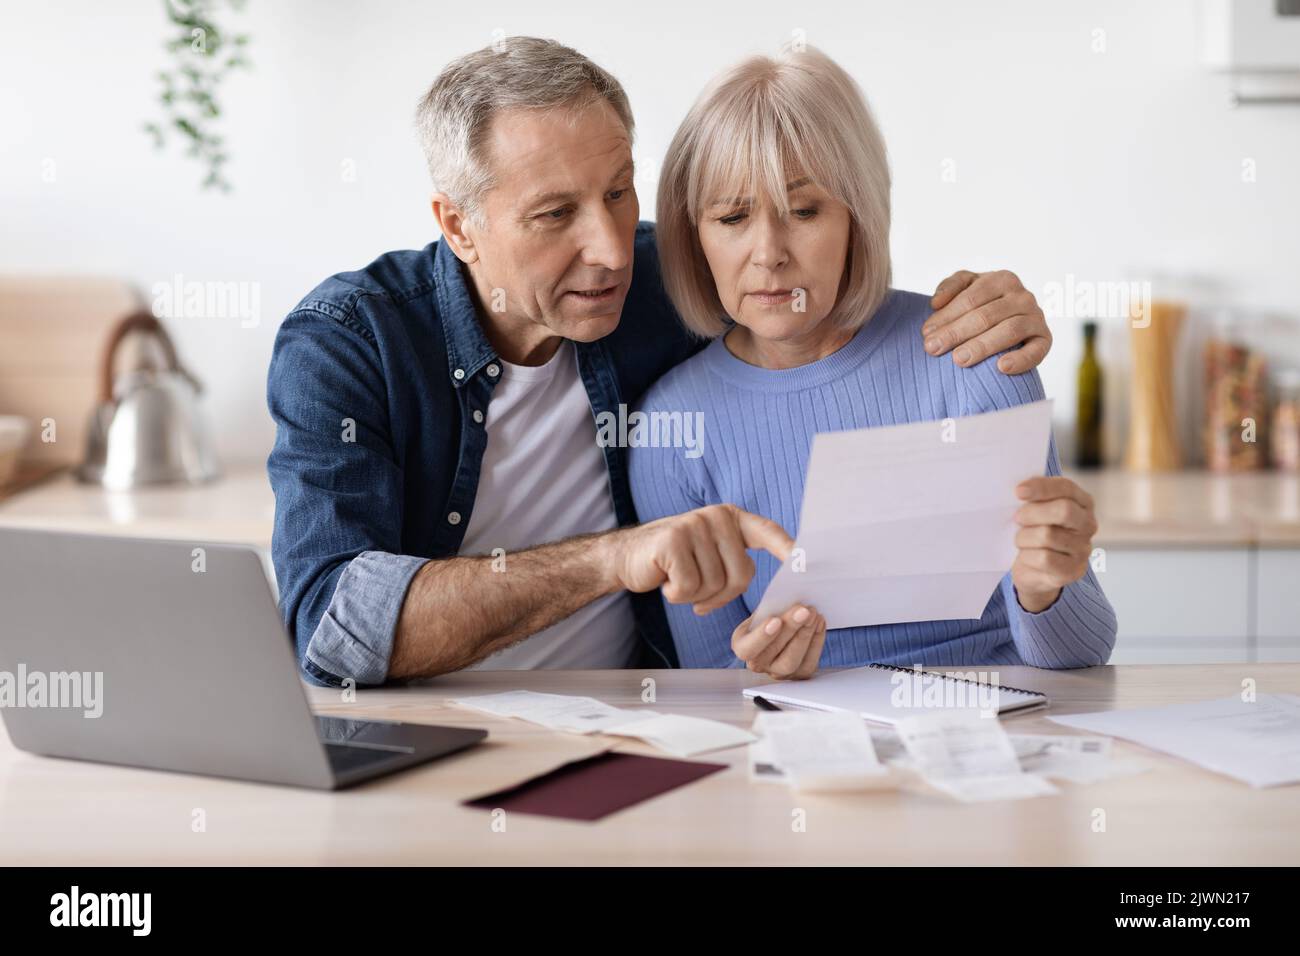 Serious pensioners sittting in front of computer, reading letter Stock Photo